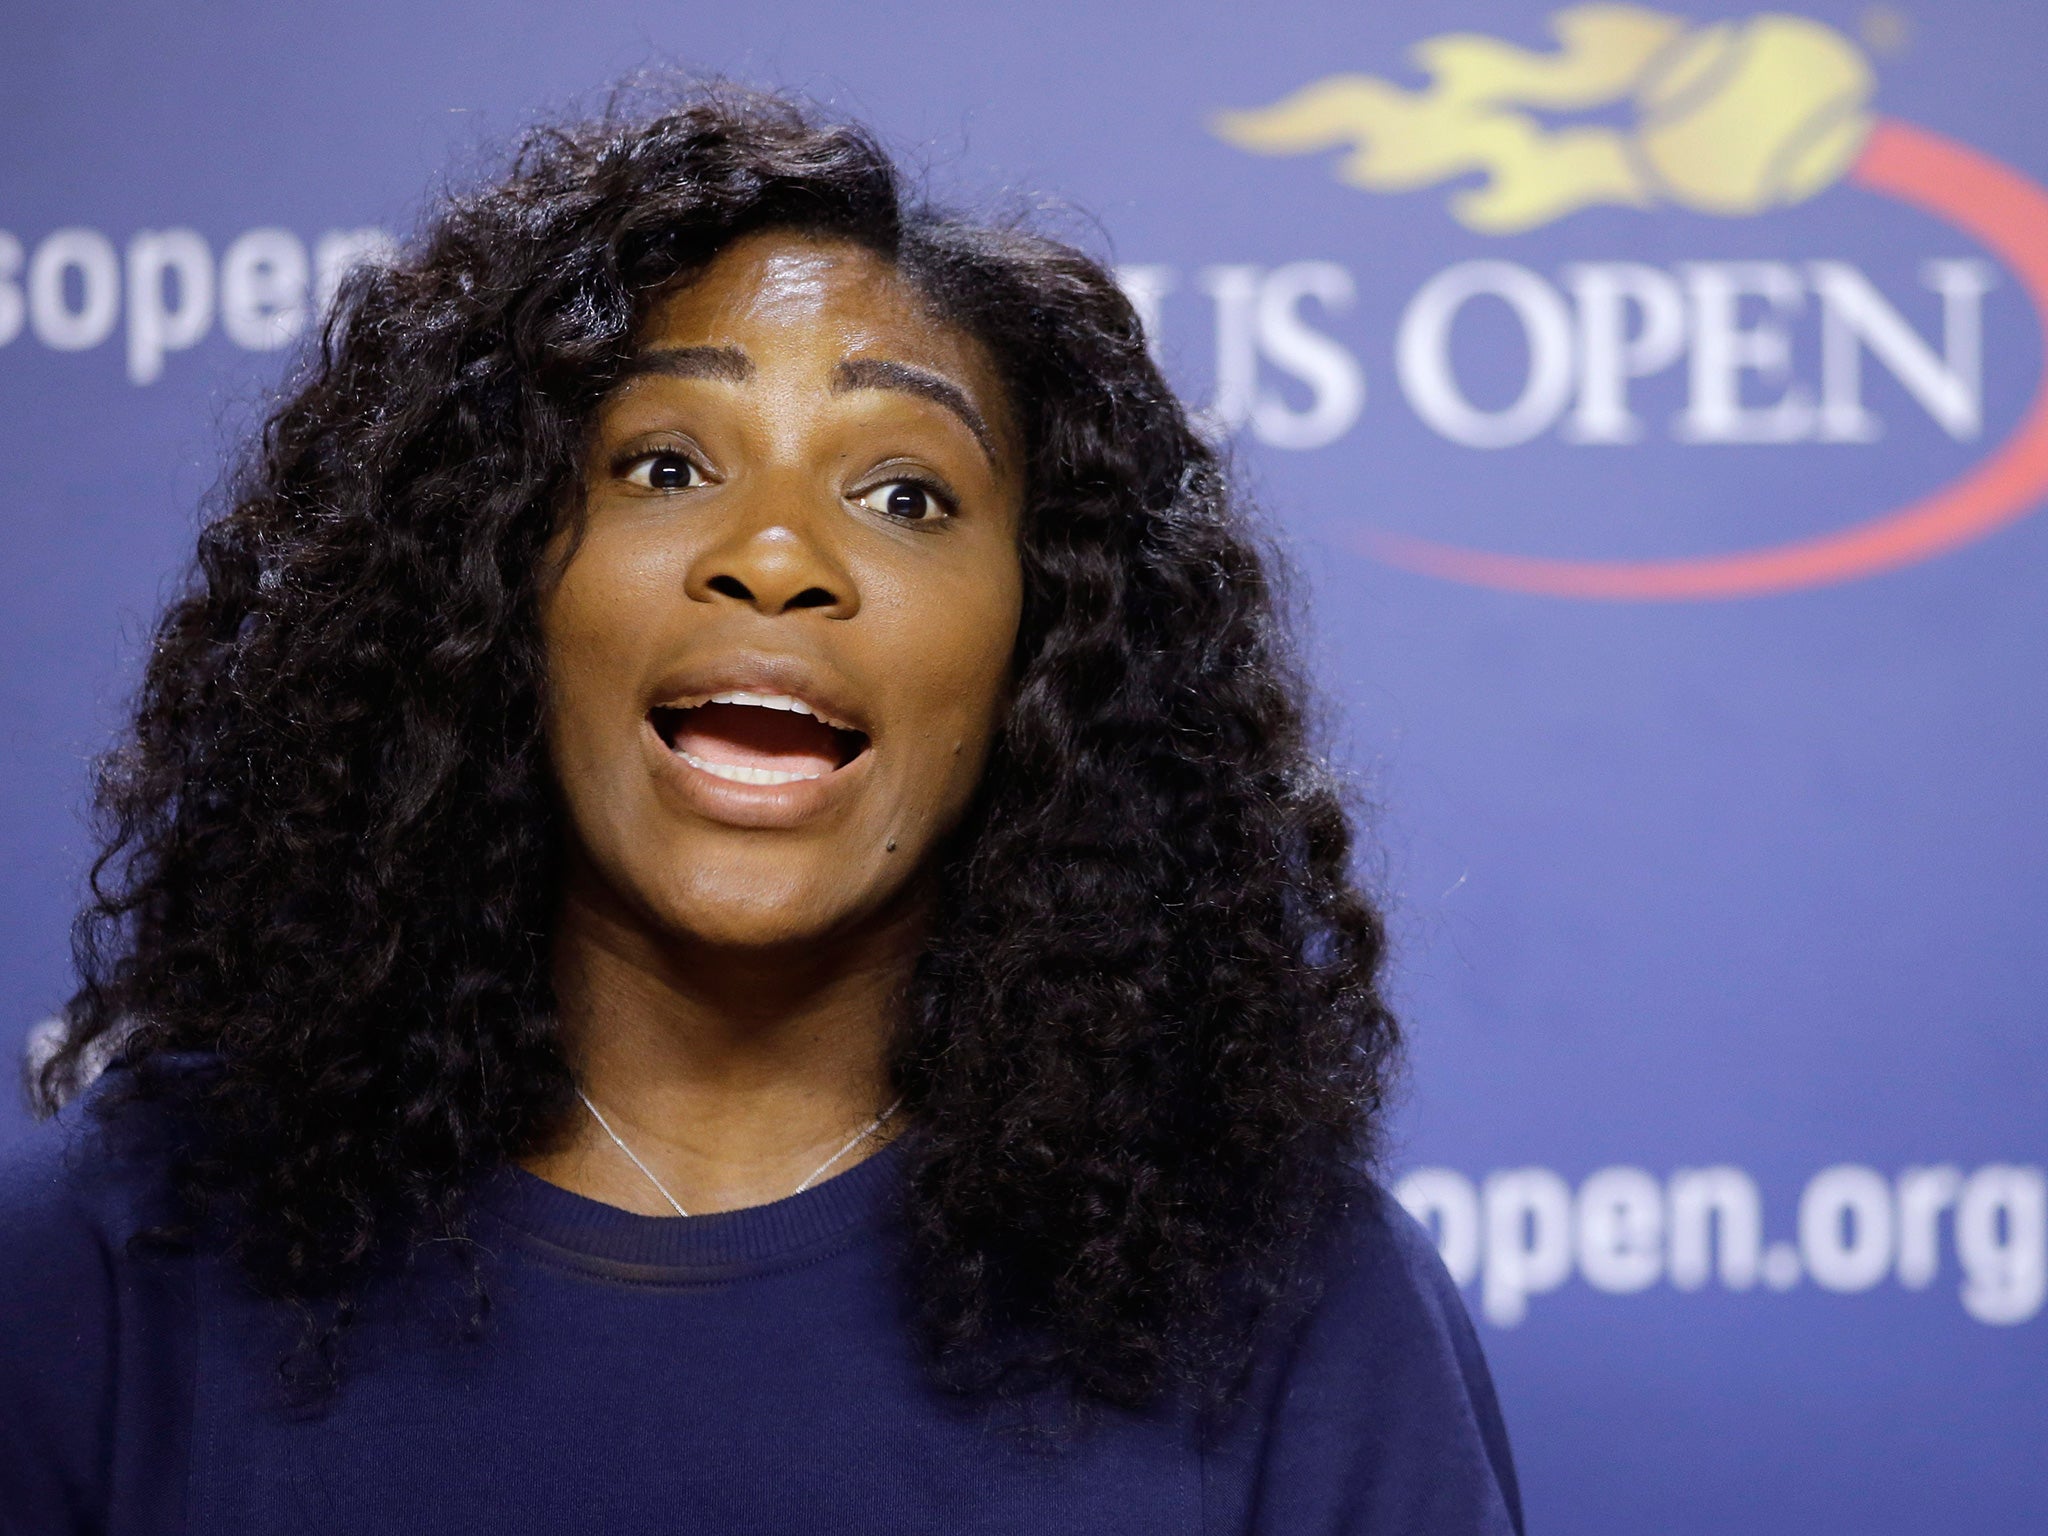 Serena Williams will be trying to win her sevent US Open title